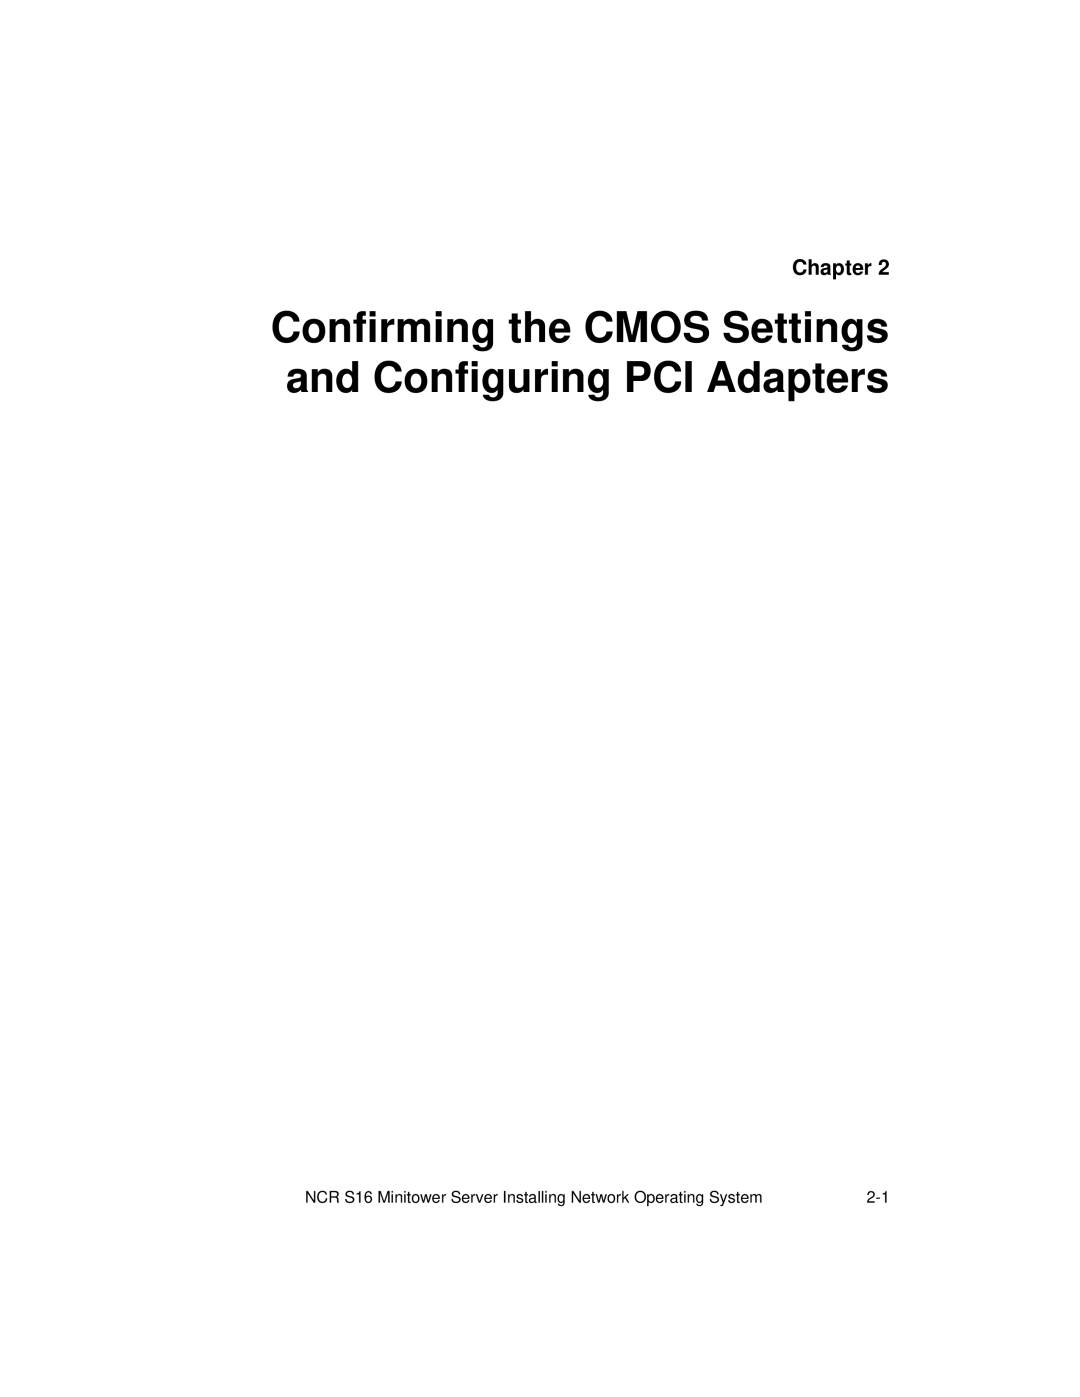 NCR S16 manual Confirming the Cmos Settings and Configuring PCI Adapters 